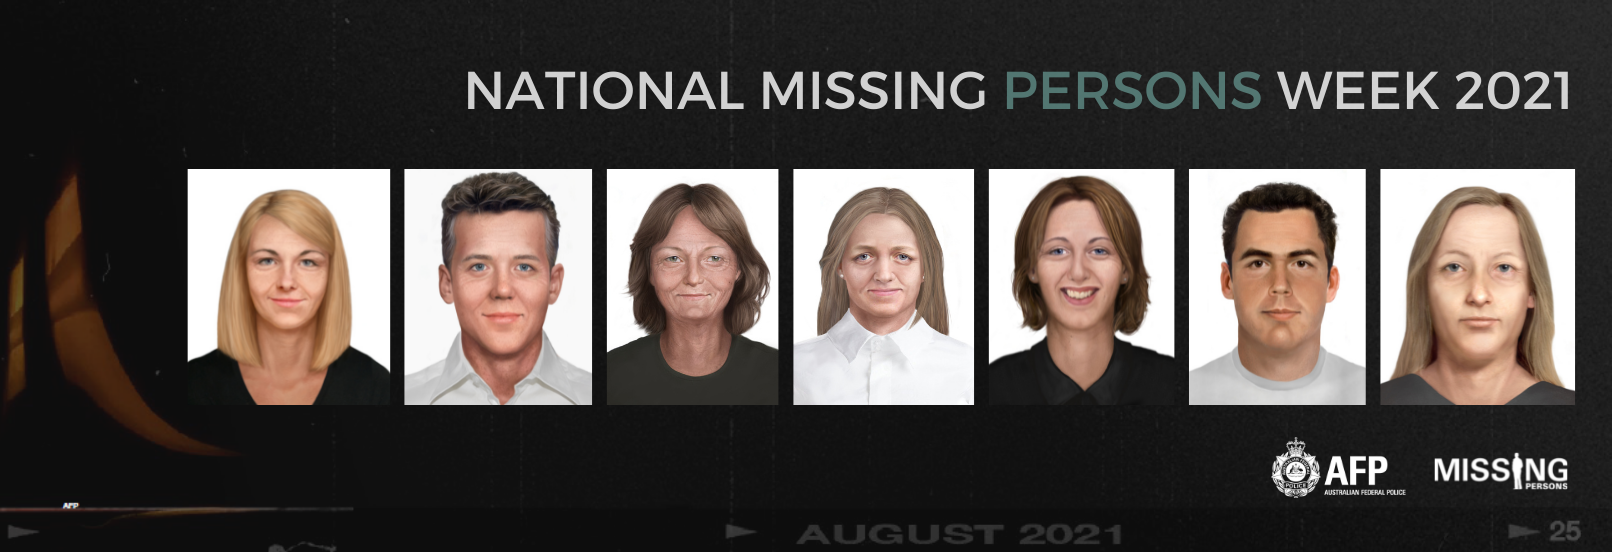 National Missing Persons Week 2021 Aged images of longterm missing